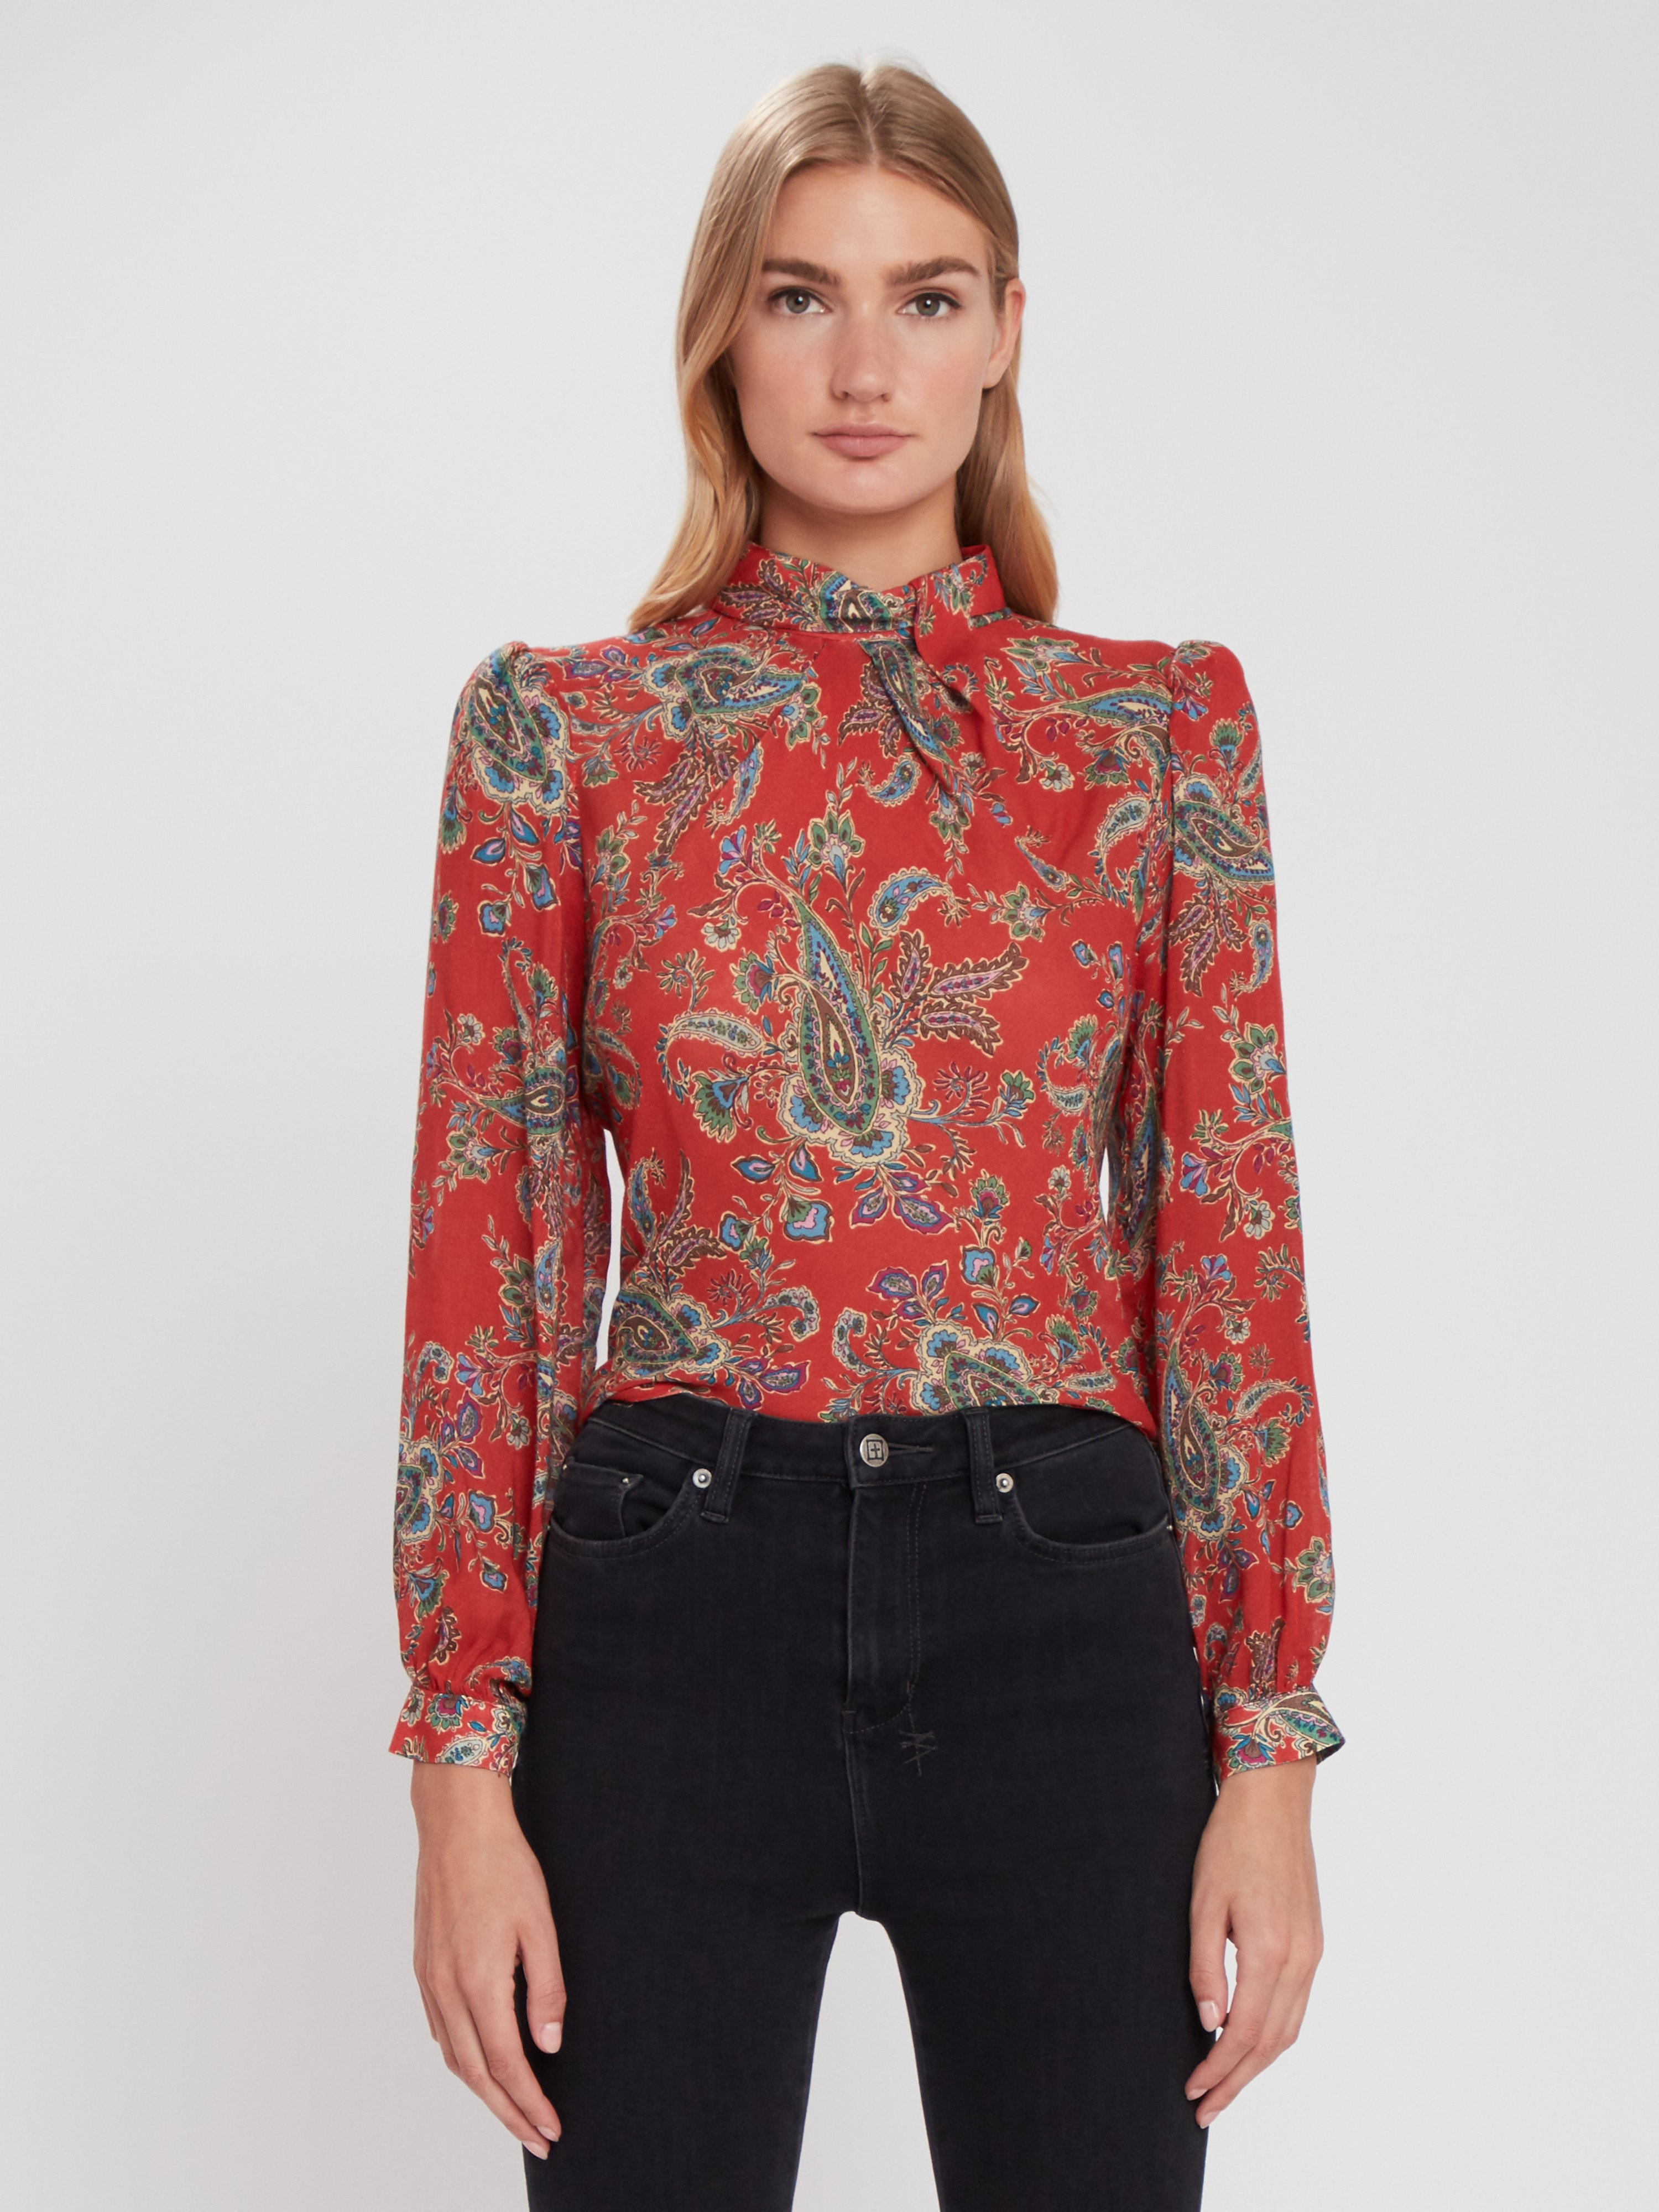 Icons Objects Of Devotion The Tess Mcgill Mock Neck Blouse In Red Paisley